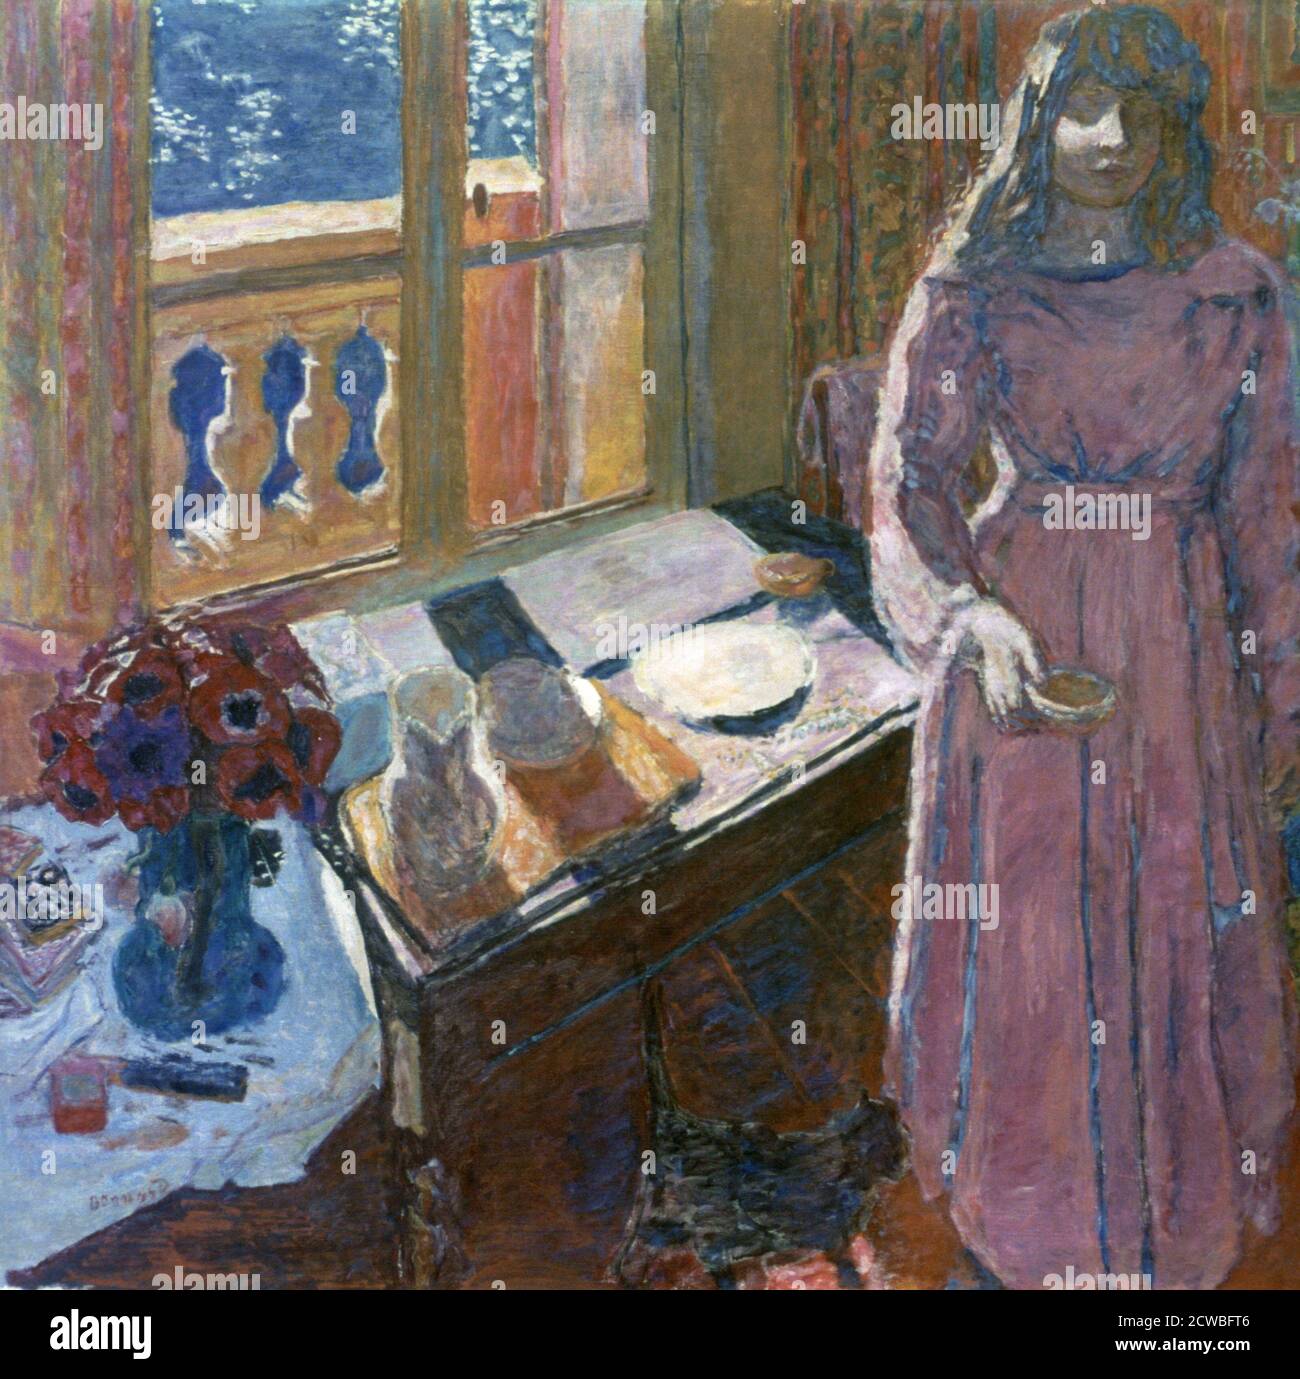 The Bowl of Milk', c1919. Artist: Pierre Bonnard. Bonnard was a French painter, illustrator, and printmaker, known for the stylized decorative qualities of his paintings and his bold use of colour. He was a founding member of the Post-Impressionist group of avant-garde painters Les Nabis. Stock Photo